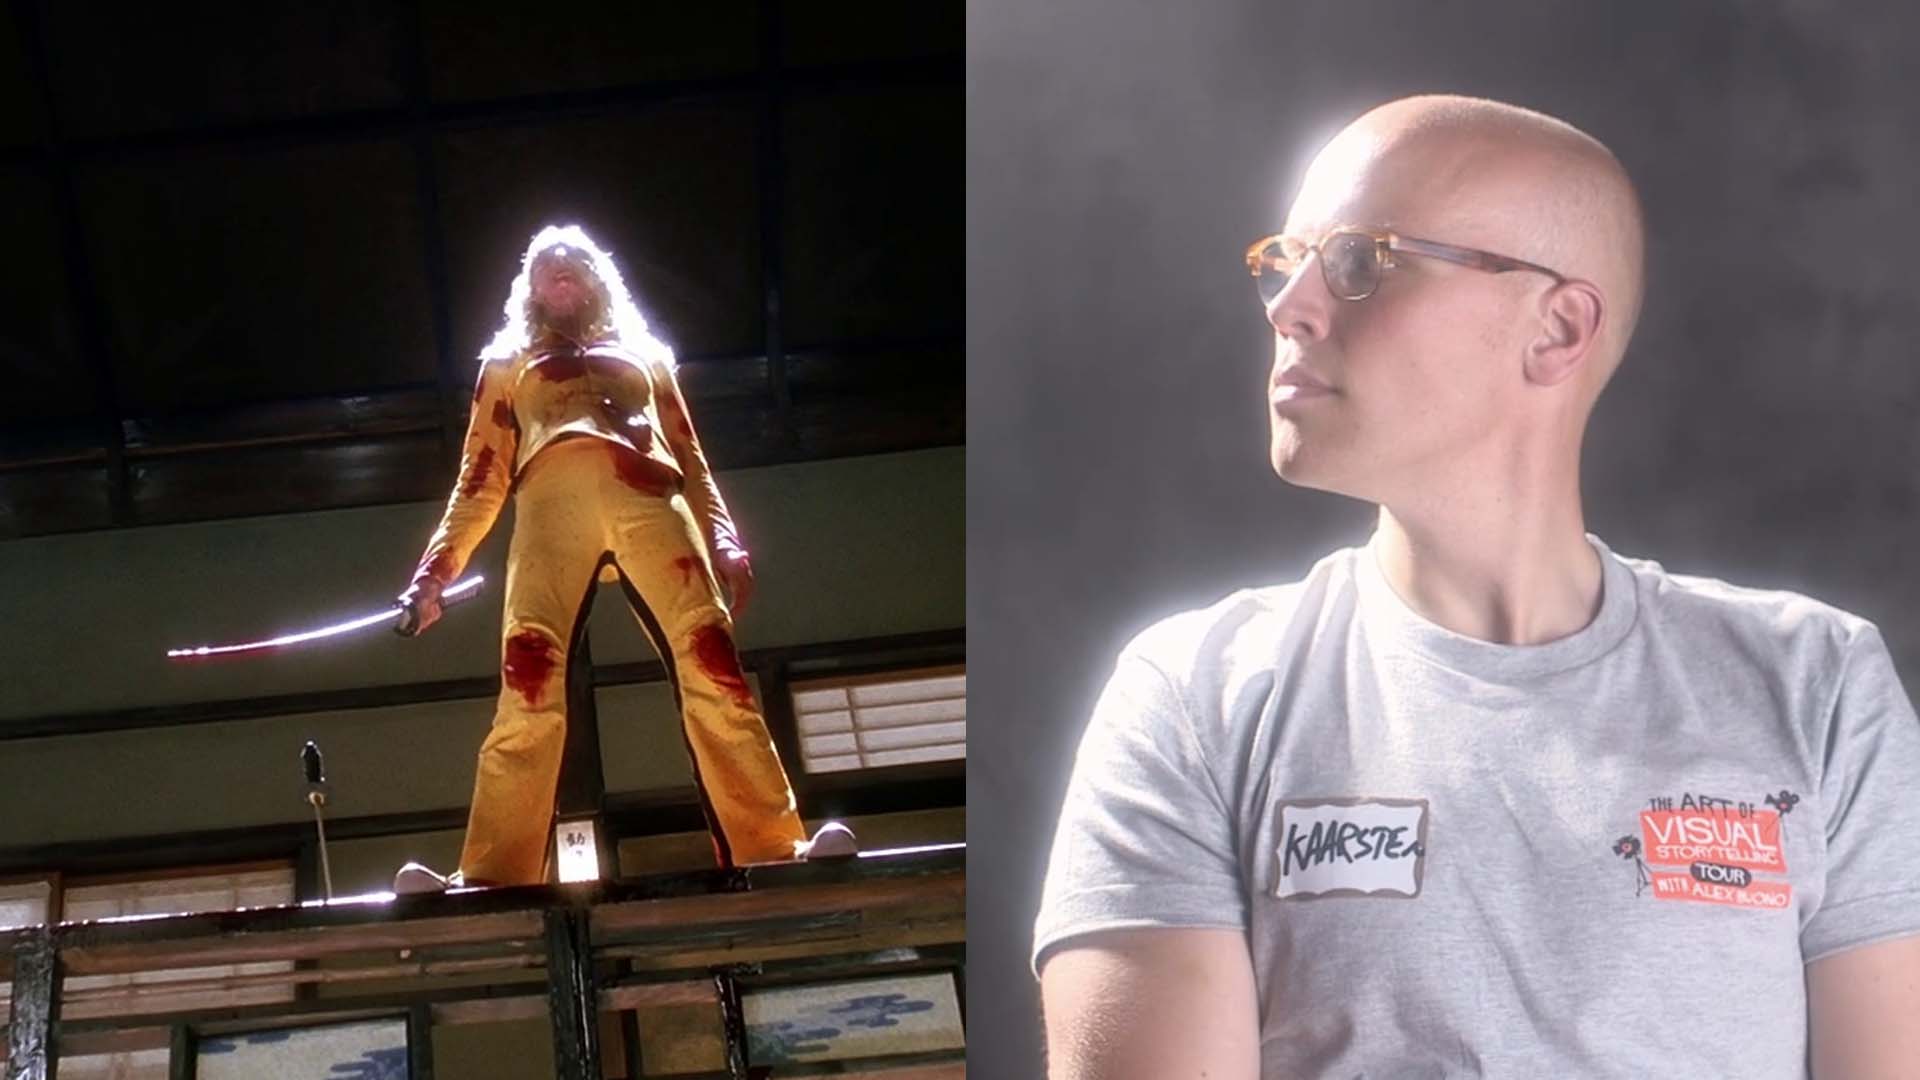 Compared images of Kill Bill and Alex's recreation of the look